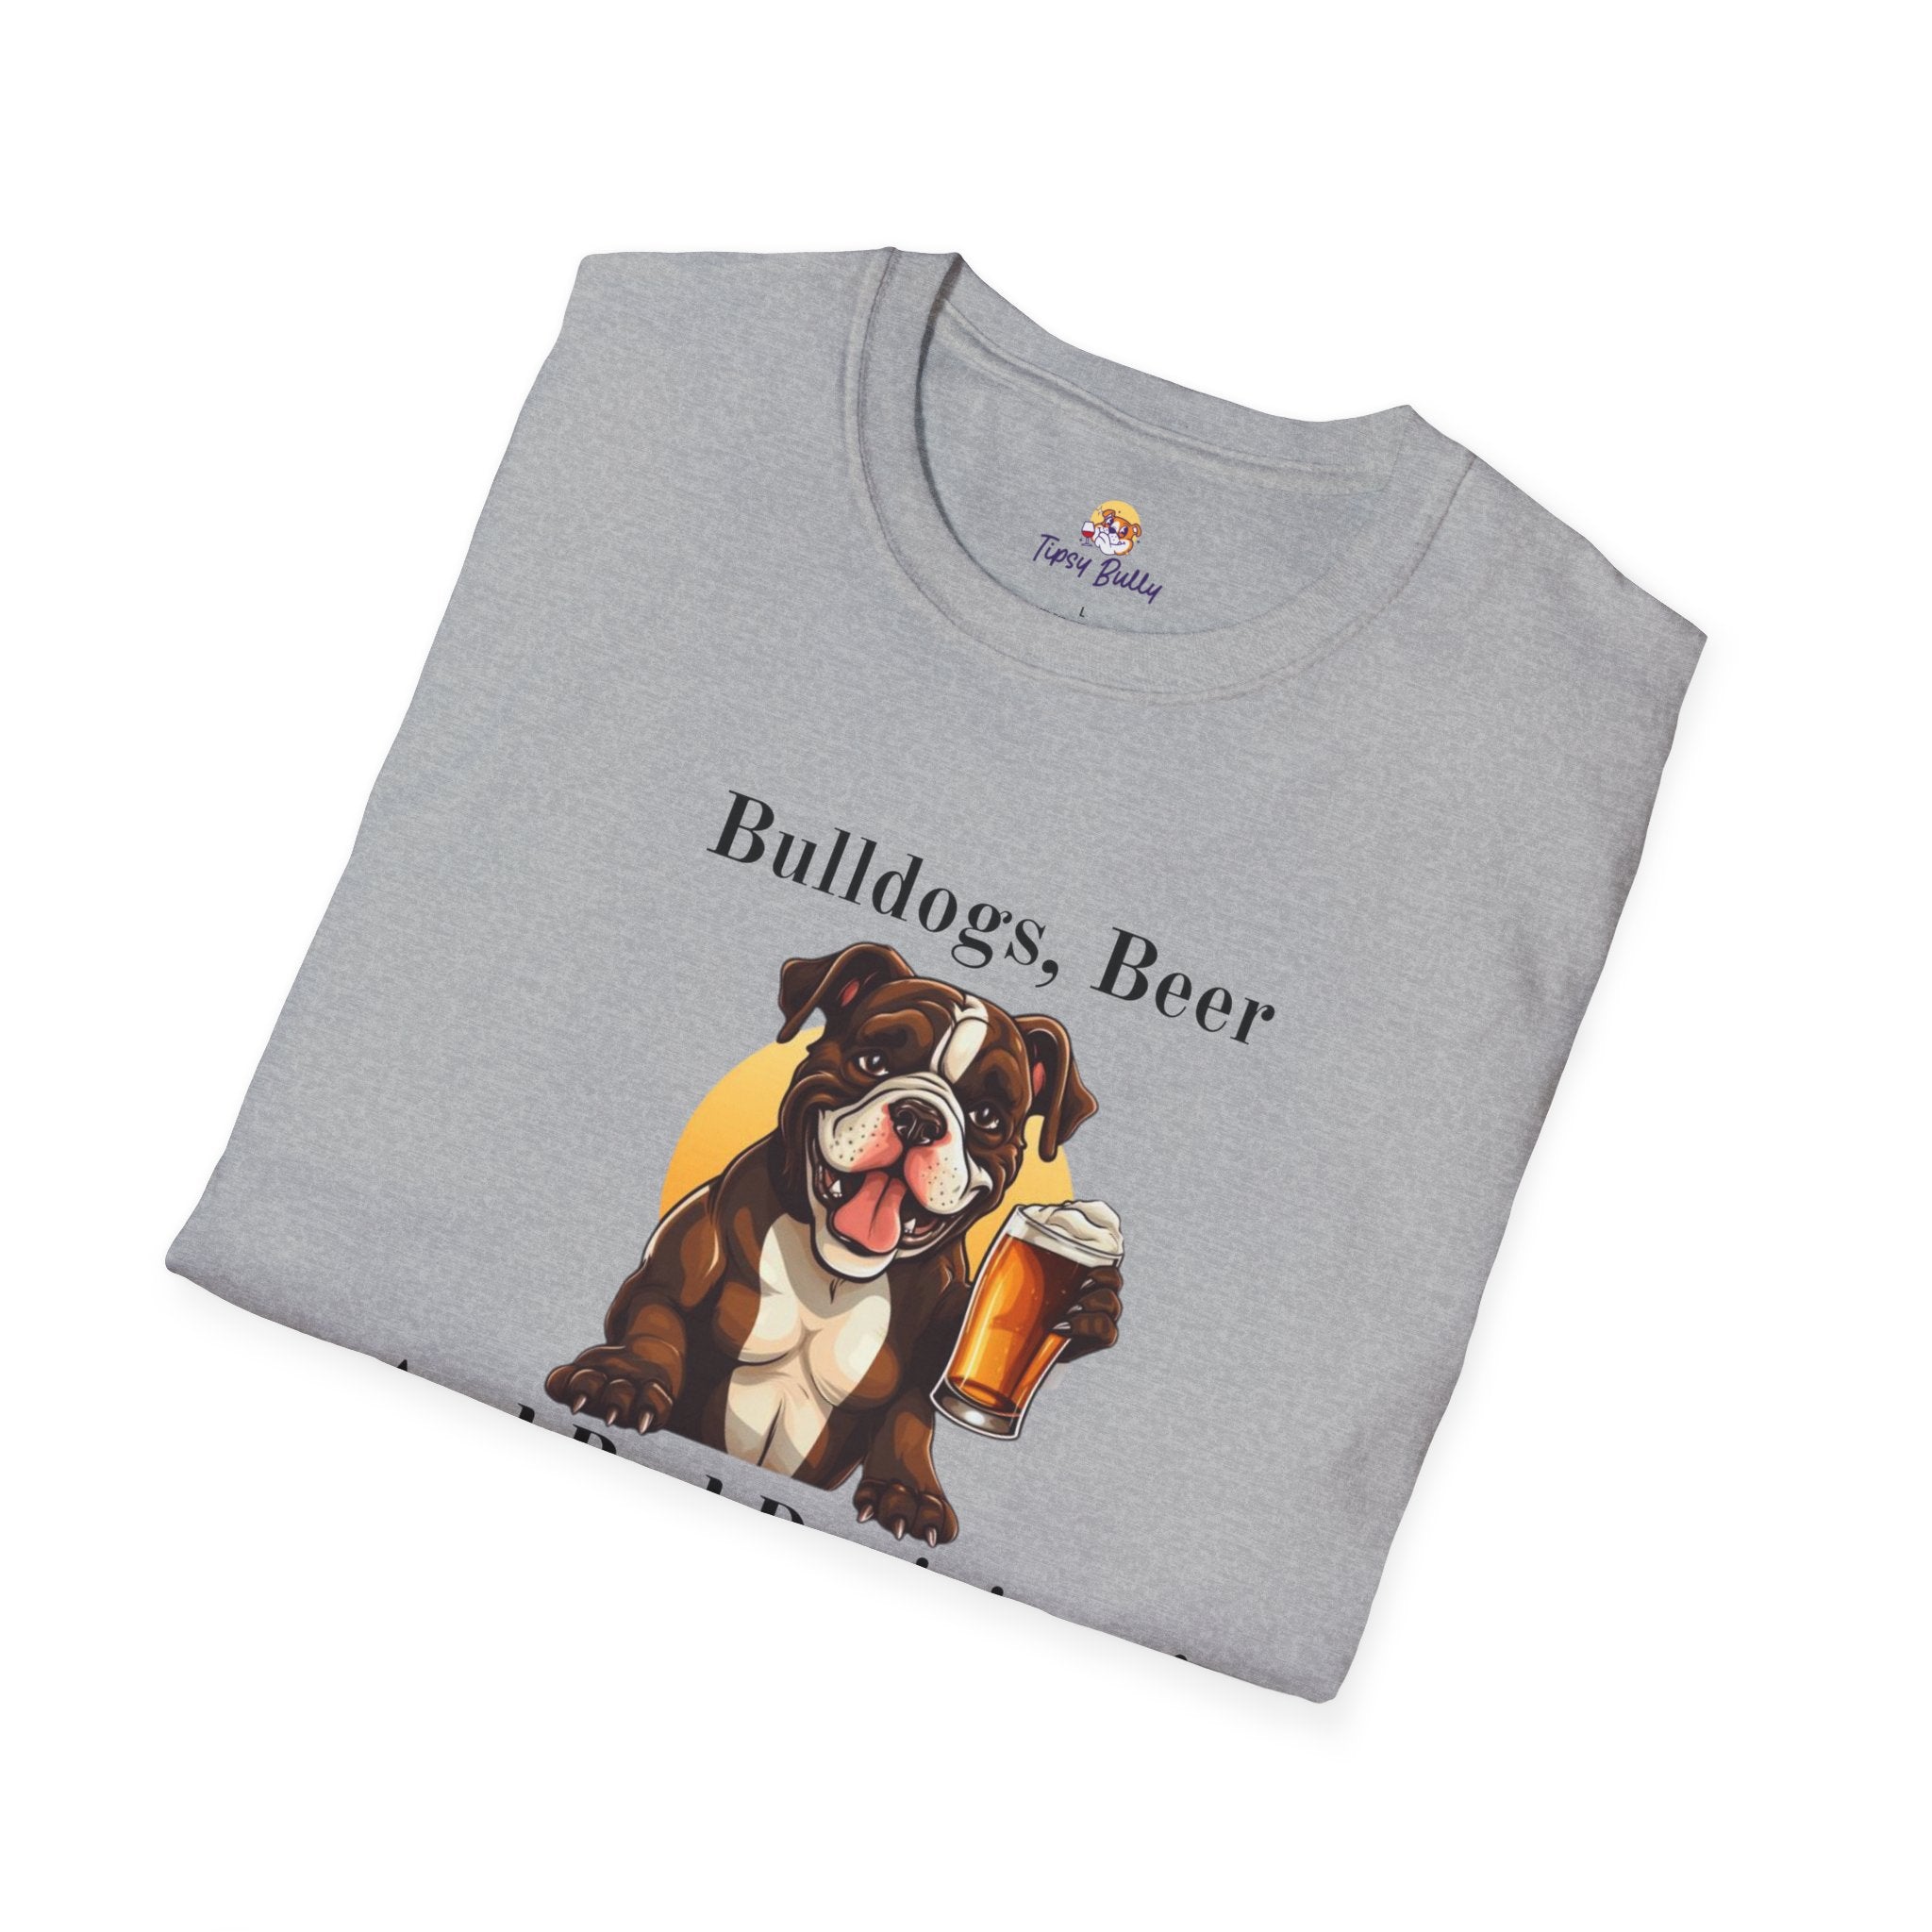 Bulldogs, Beer, and Bad Decisions" Unisex T-Shirt by Tipsy Bully (American/Brown)